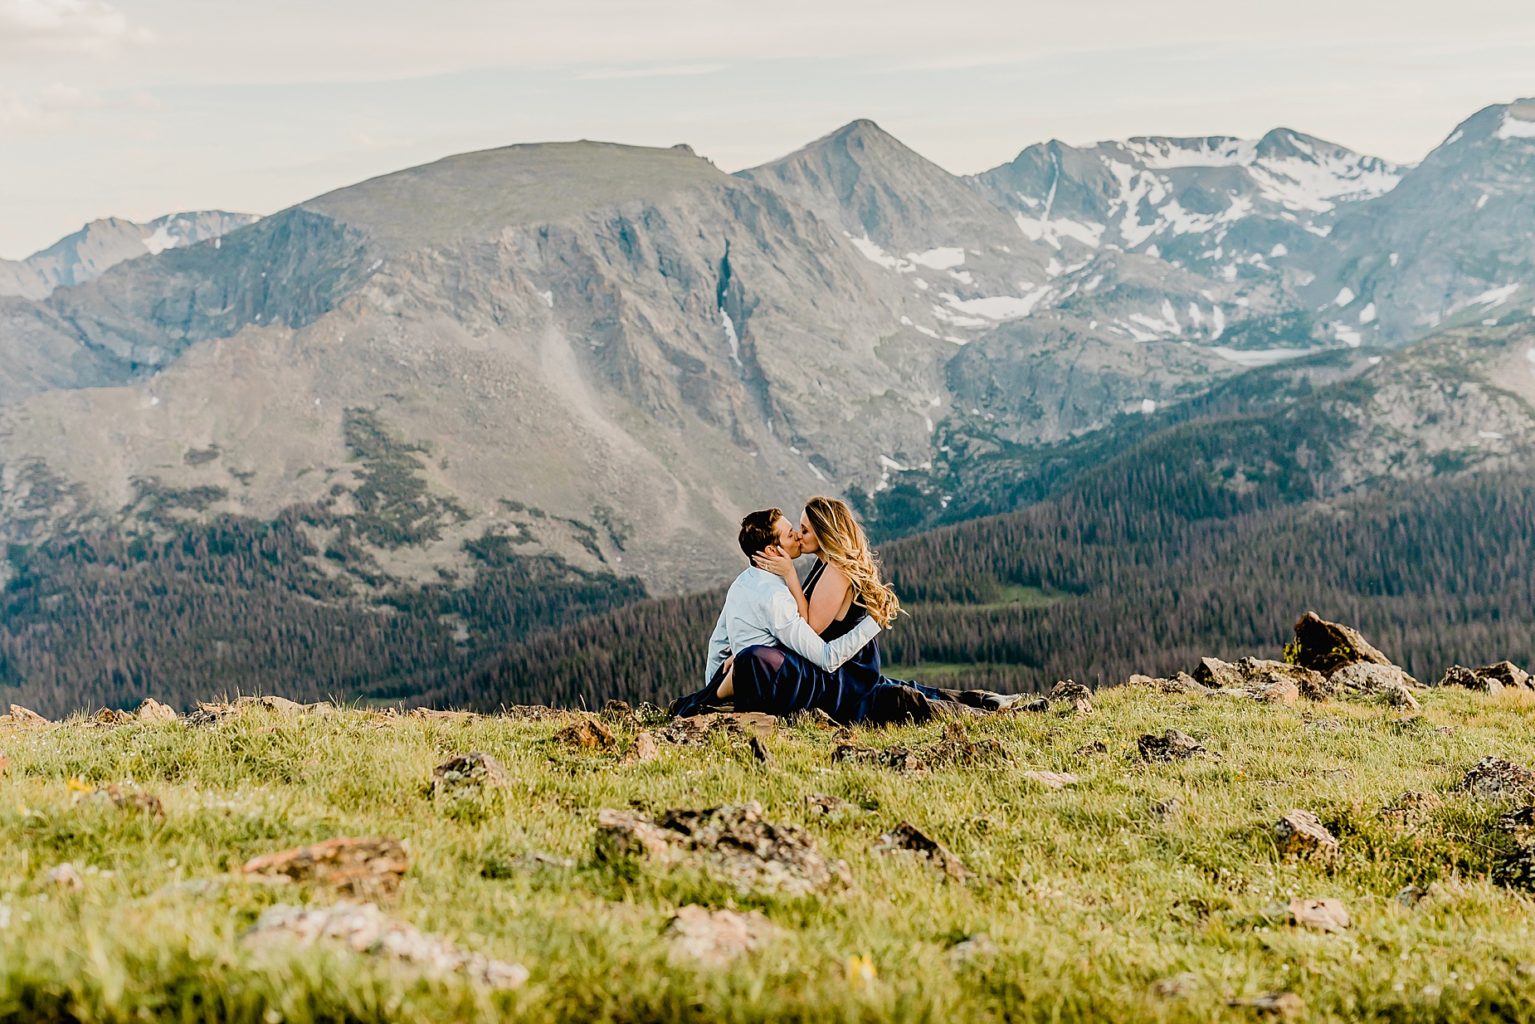 man and woman sit in the grass overlooking mountain backdrop with beautiful colors